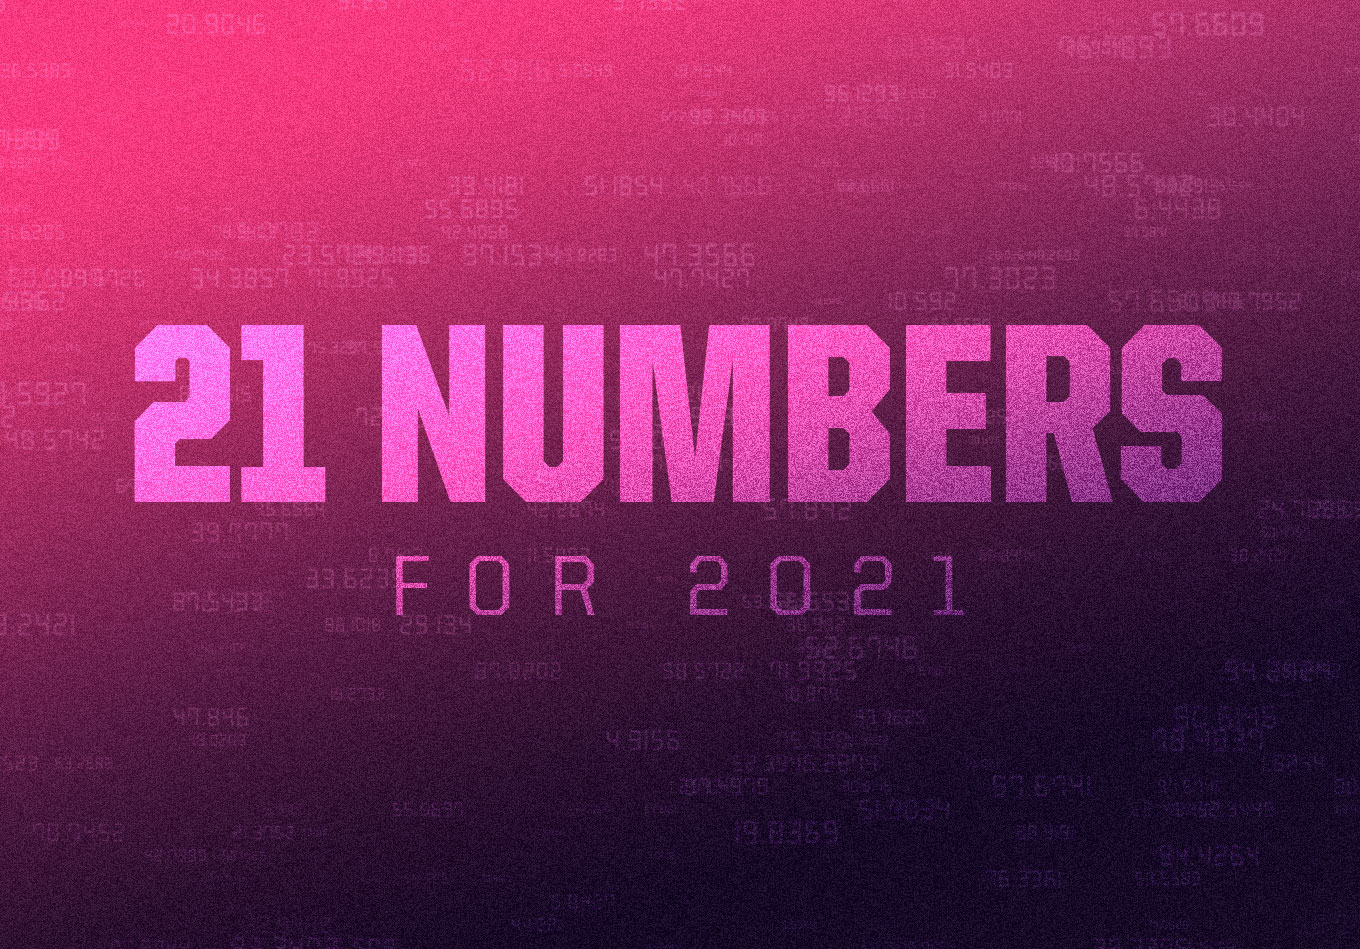 The 21 Numbers of 2021